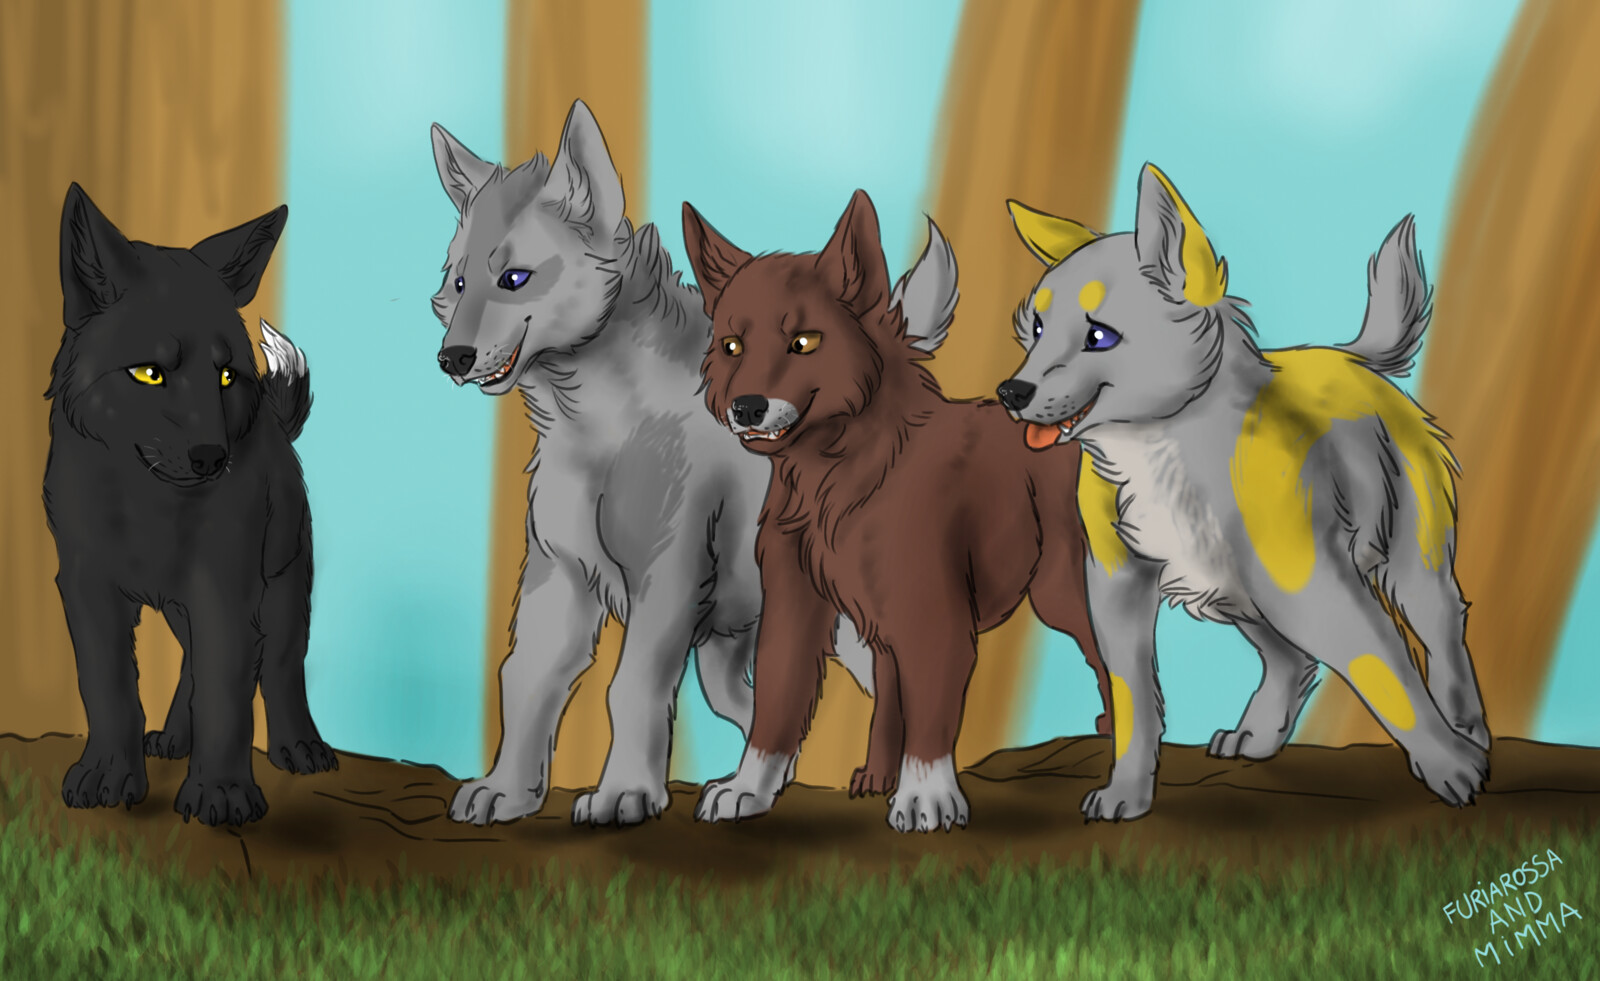 The other pups of the pack are sneering at Alex, because he's just an omega, while they are all sons and daughters of the higher ranks of the packs... poor puppy!
